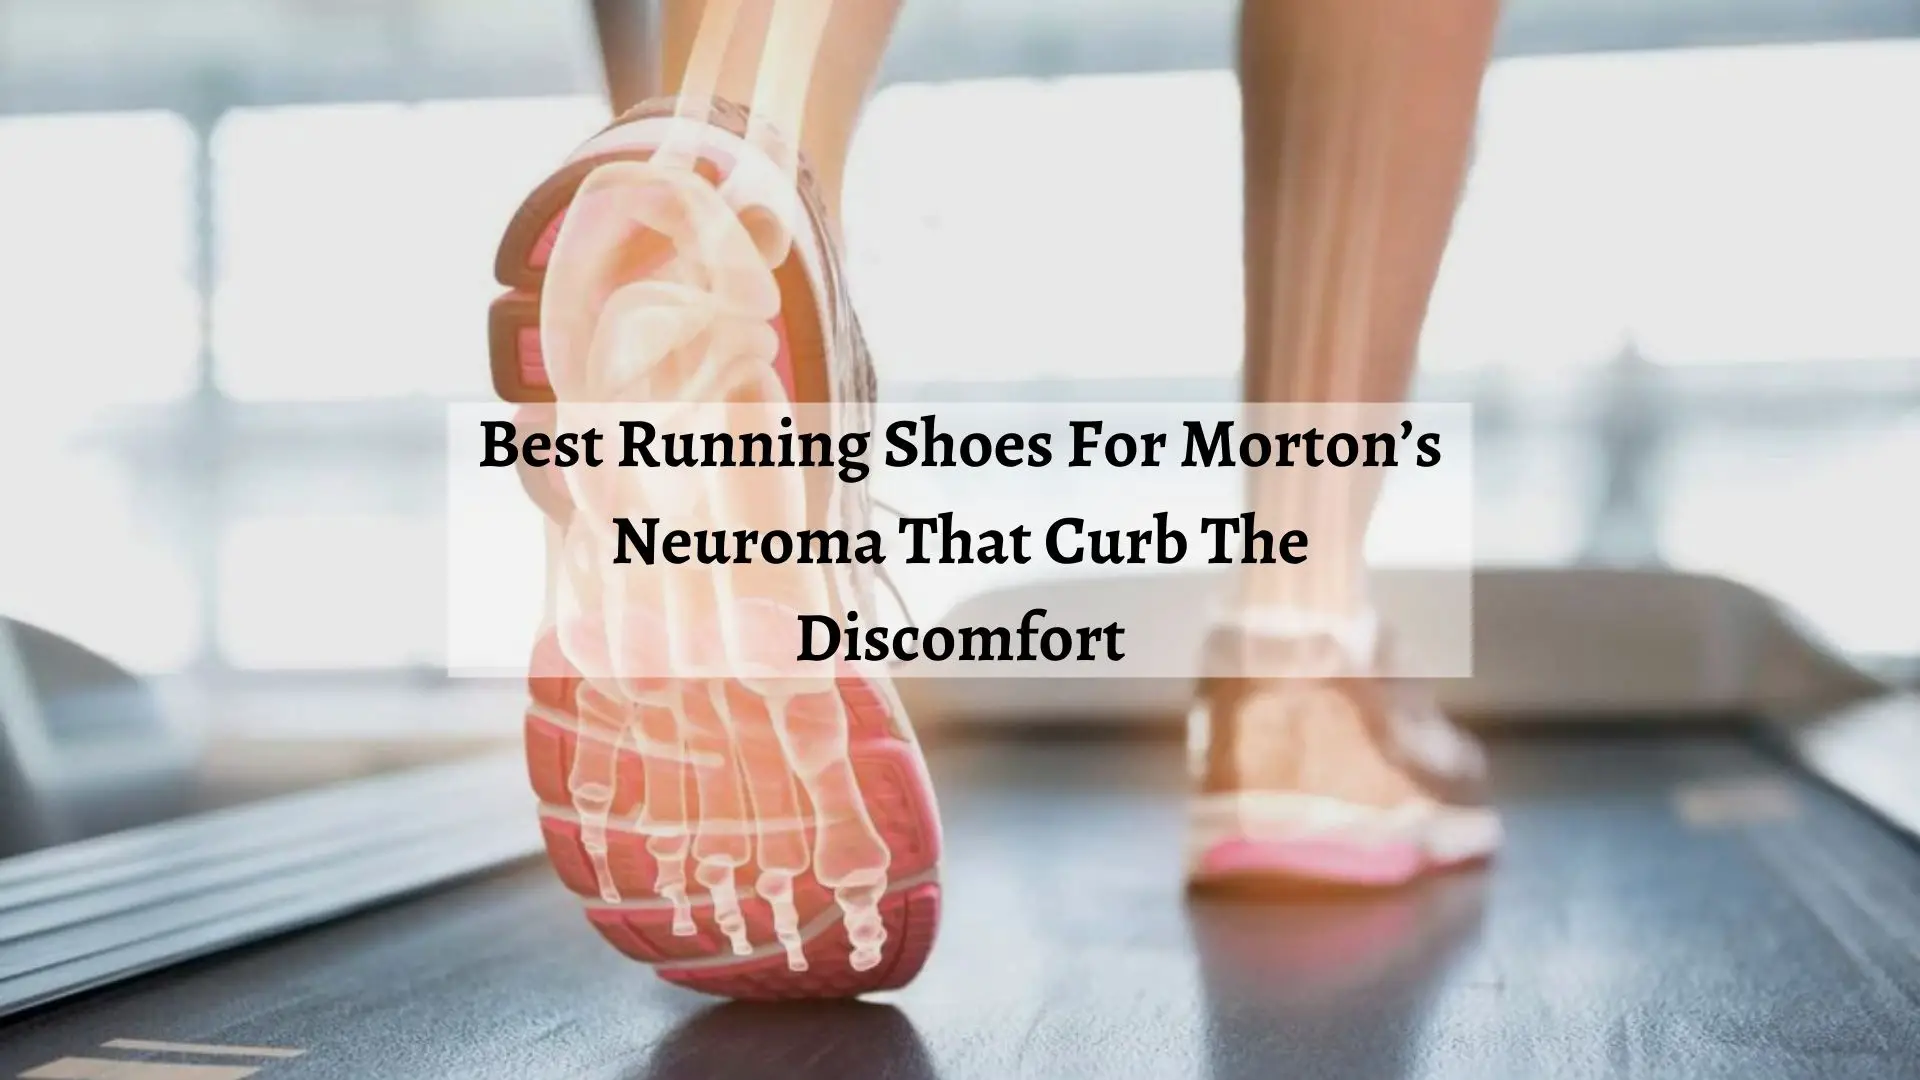 Best Running Shoes For Morton's Neuroma In 2019 – A Runner's Choice ...